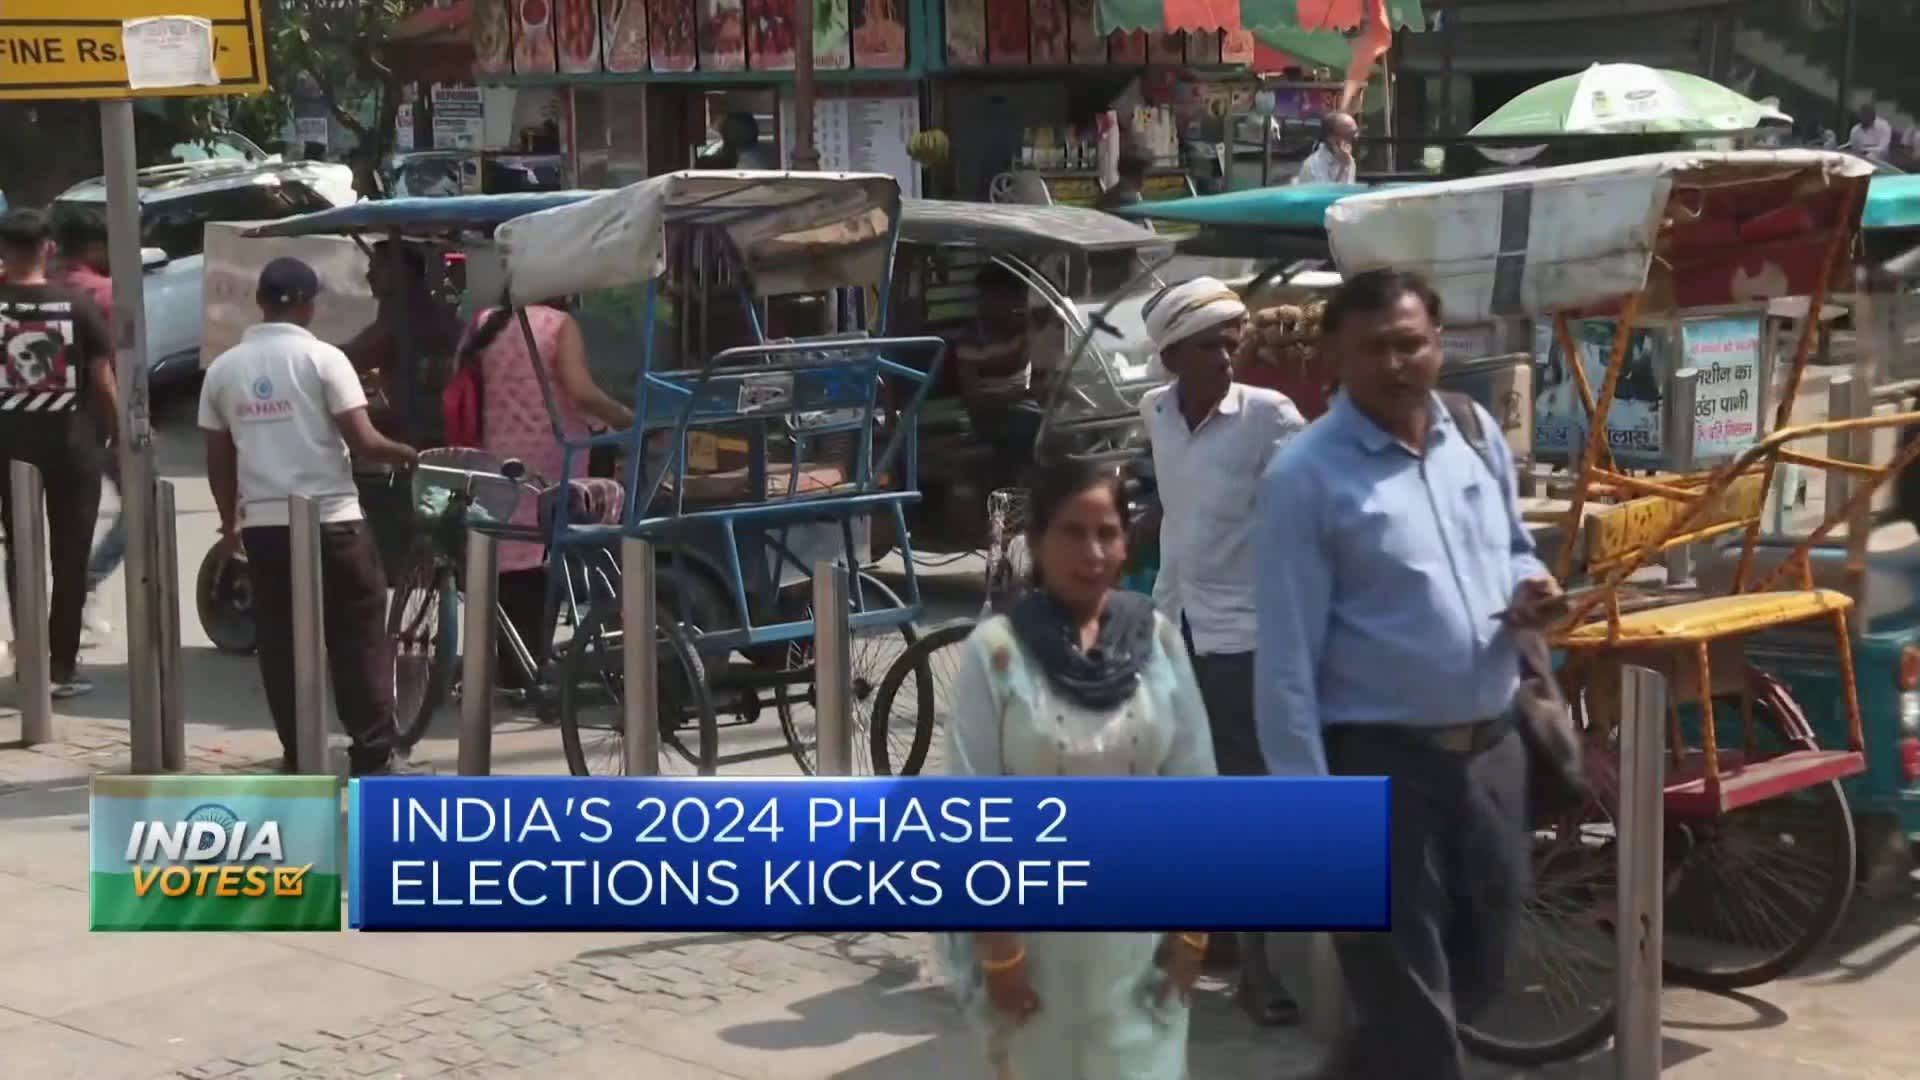 India kicks off second phase of its 2024 election [Video]